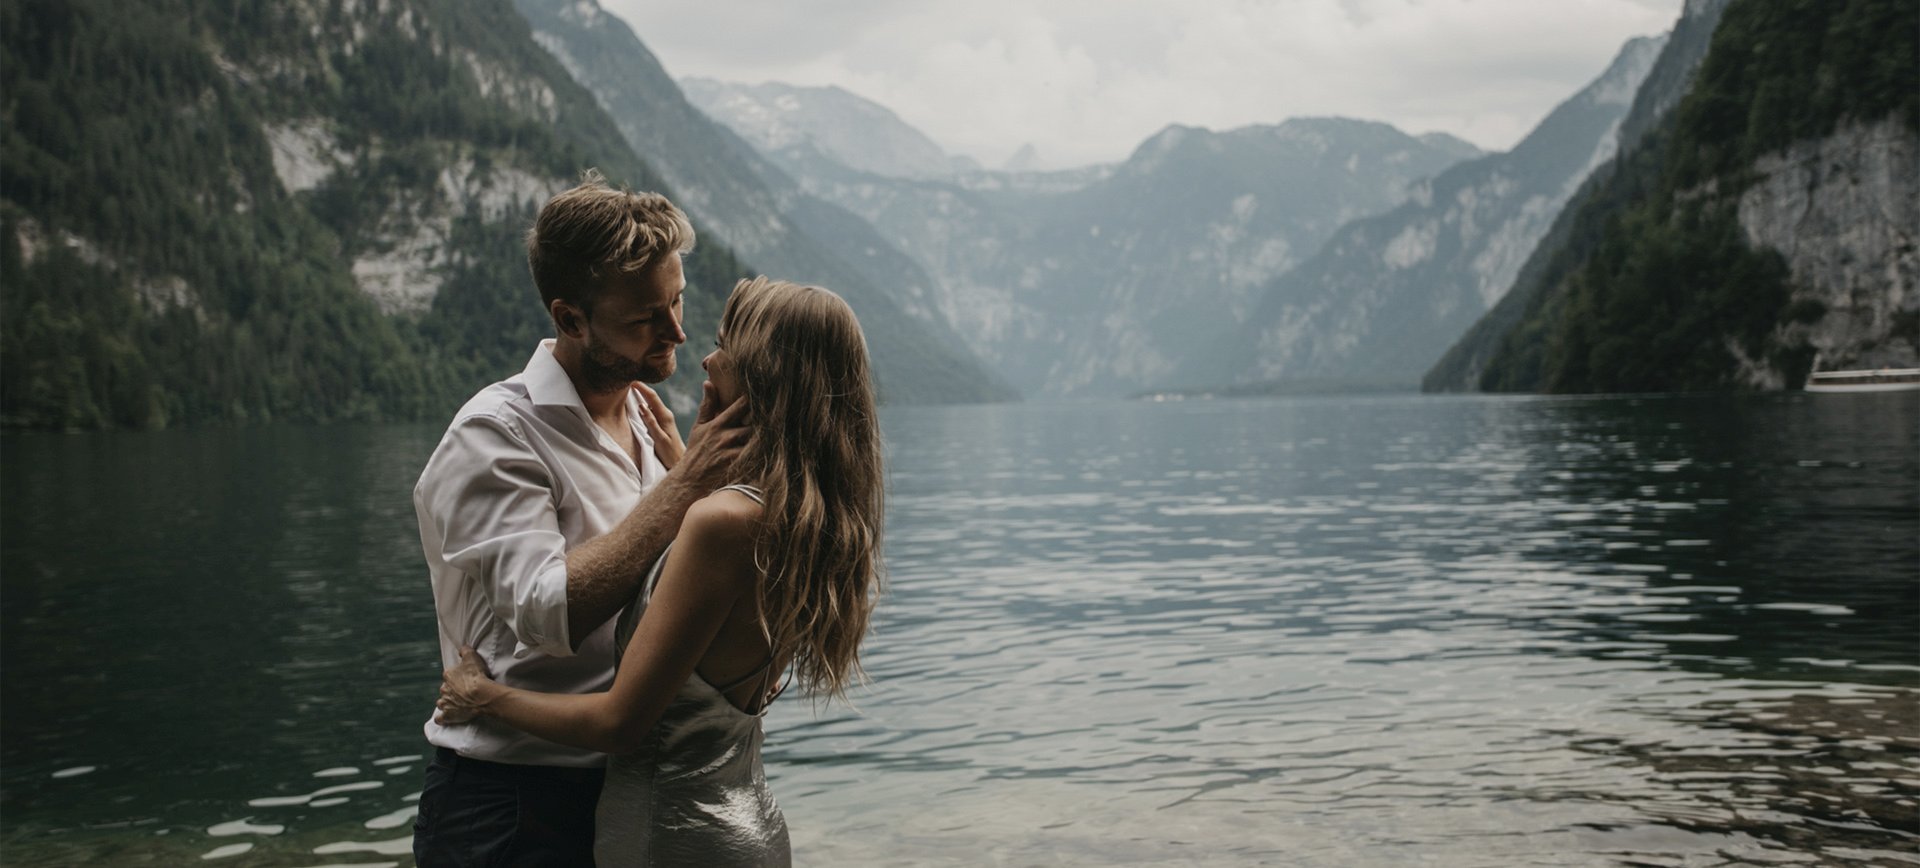 mountain couple photoshoot at lake koenigssee in germany